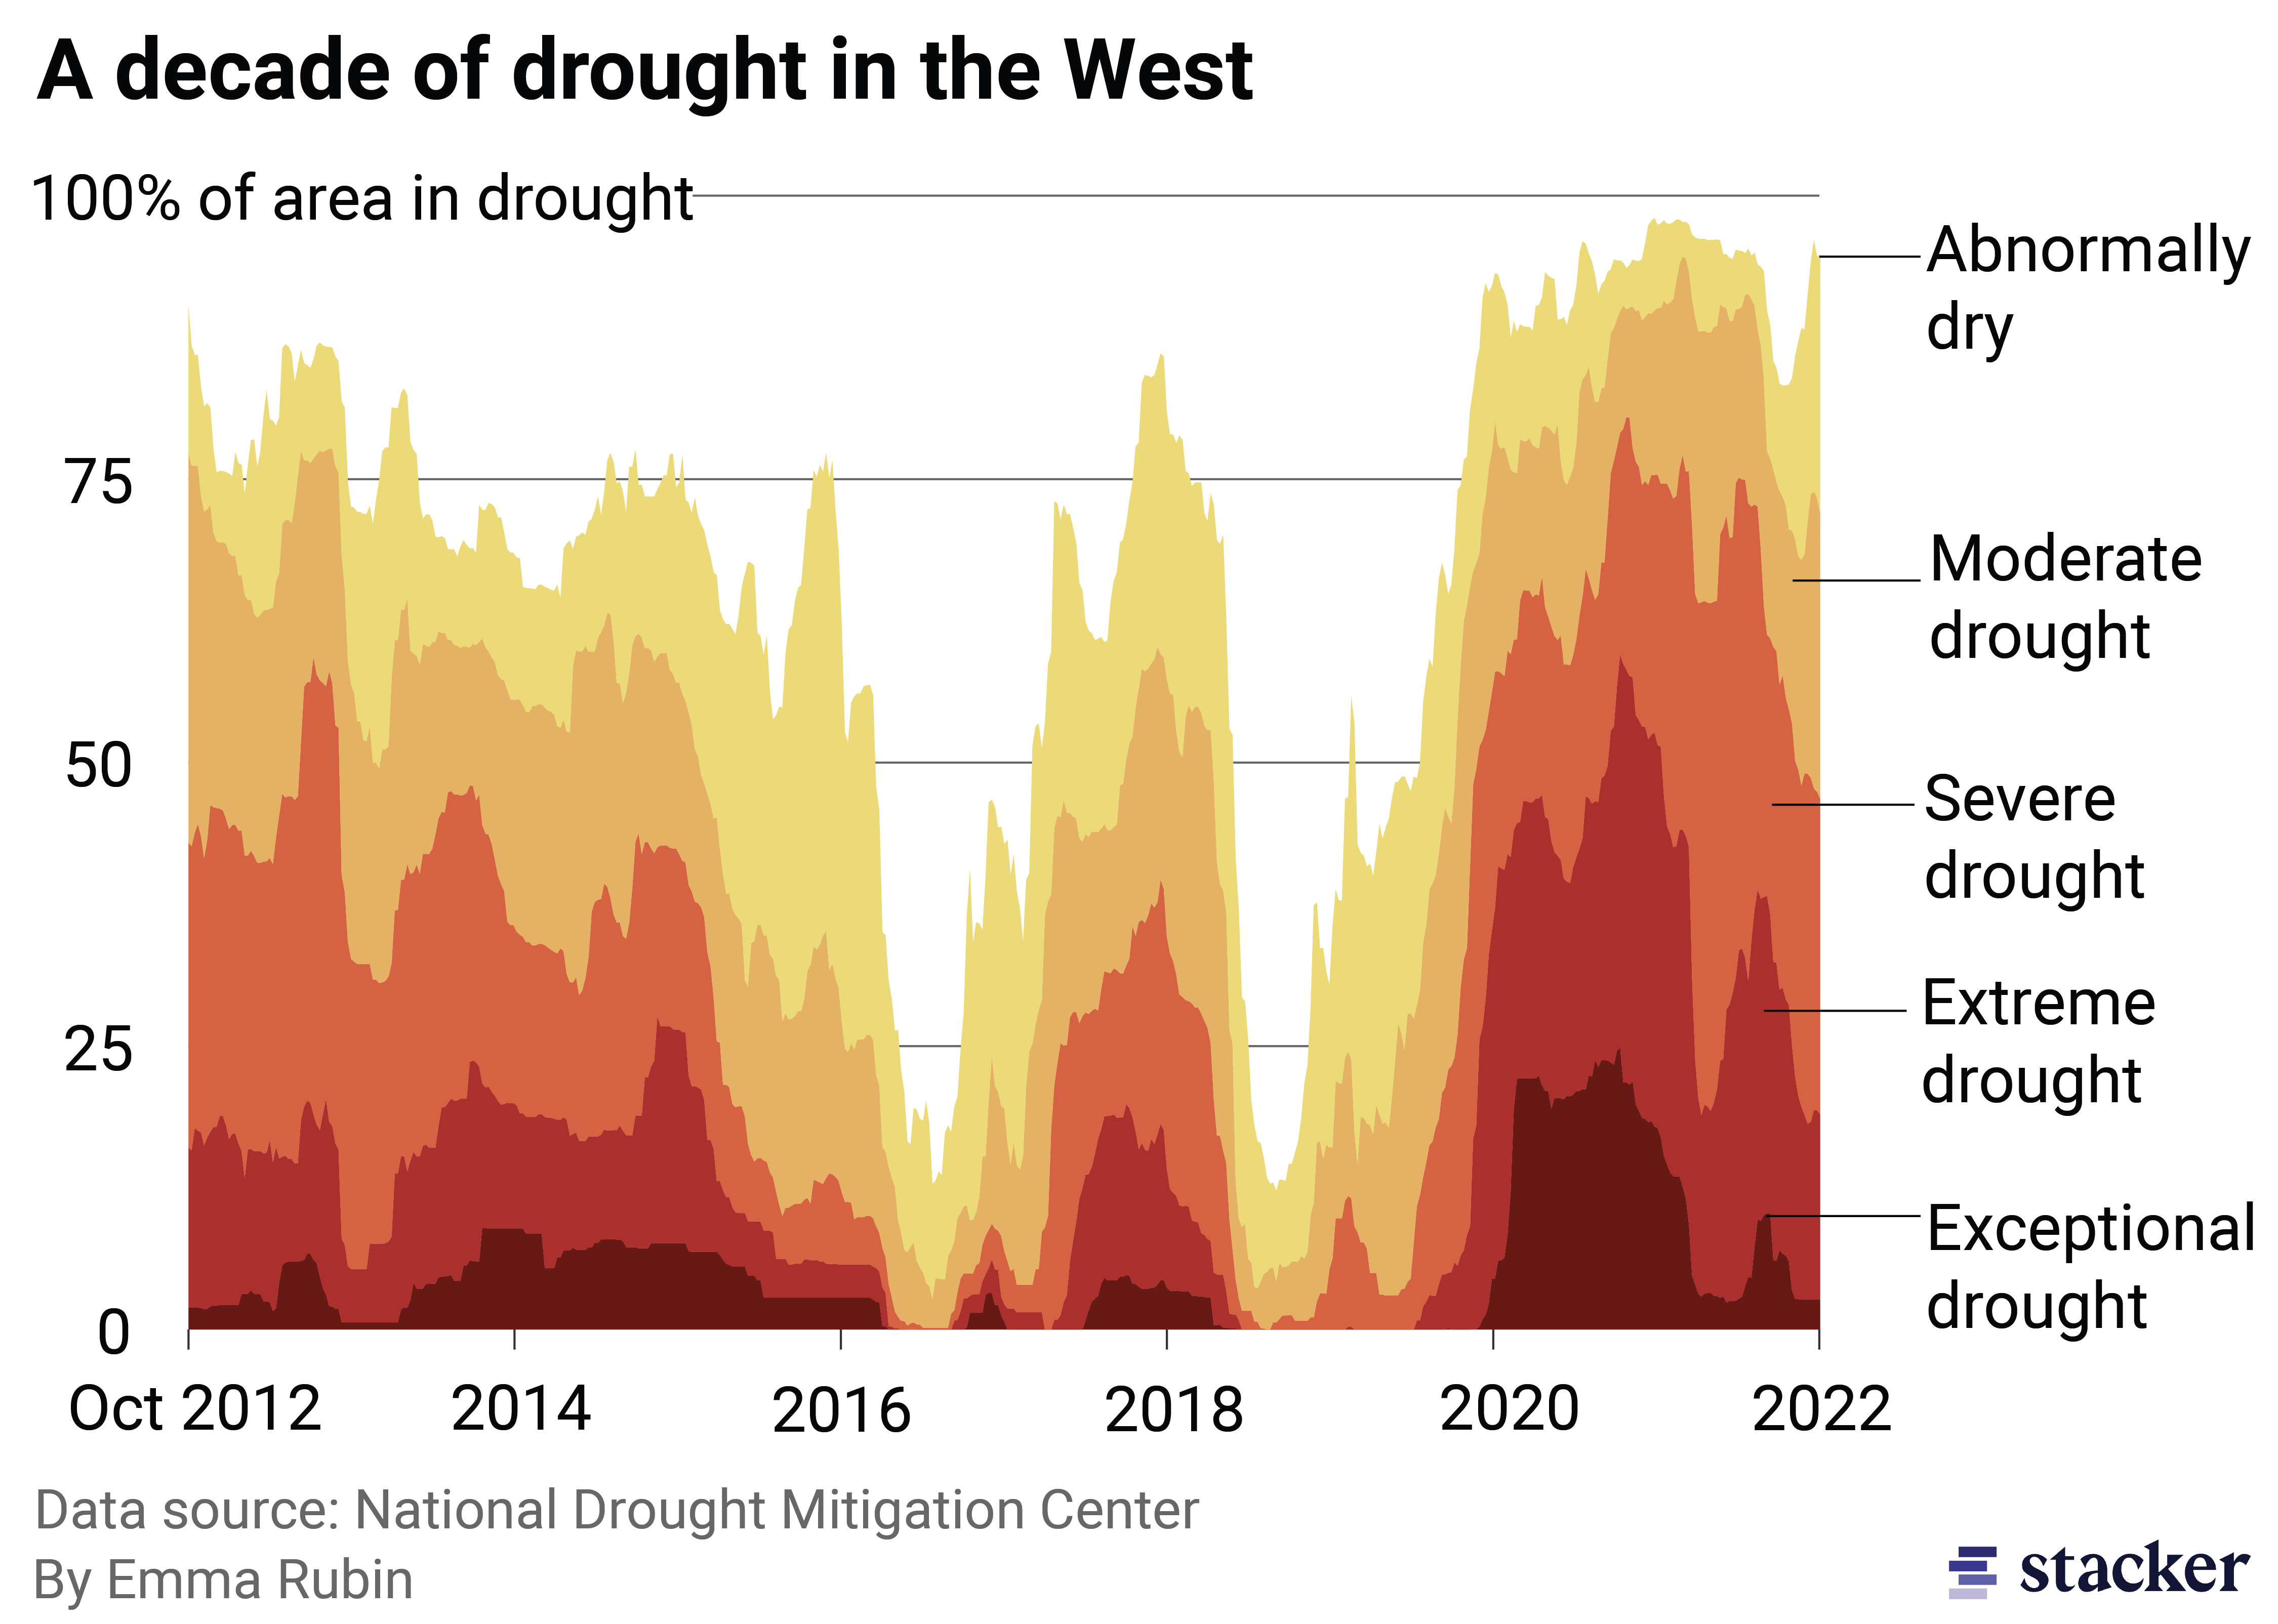 Chart showing the percent of the West in drought between Oct 2012-2022